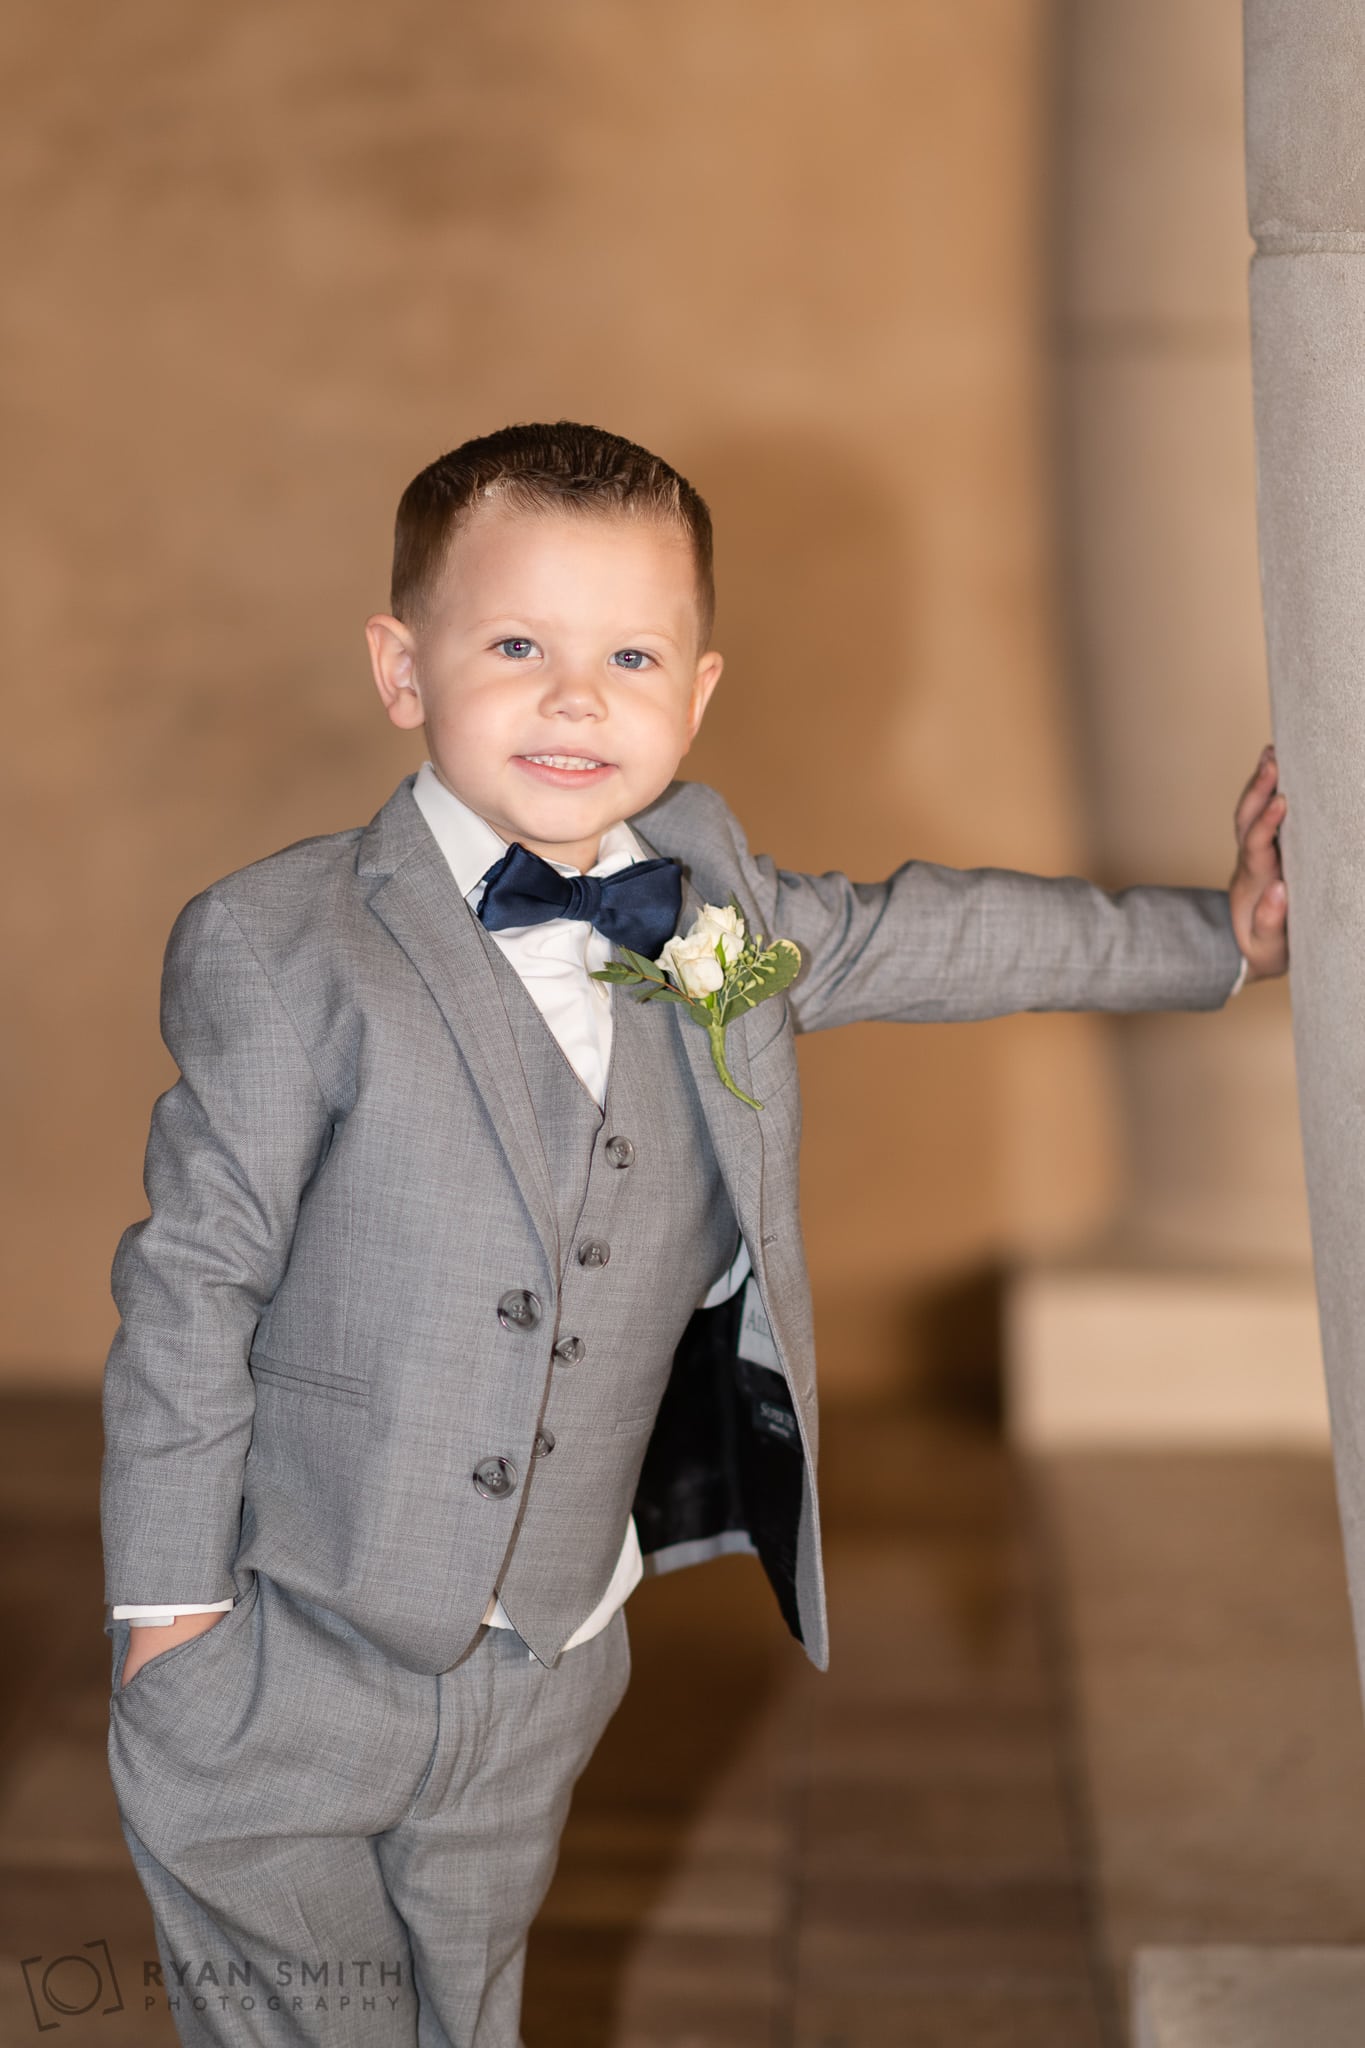 Ring bearer posing  - 21 Main Events - North Myrtle Beach